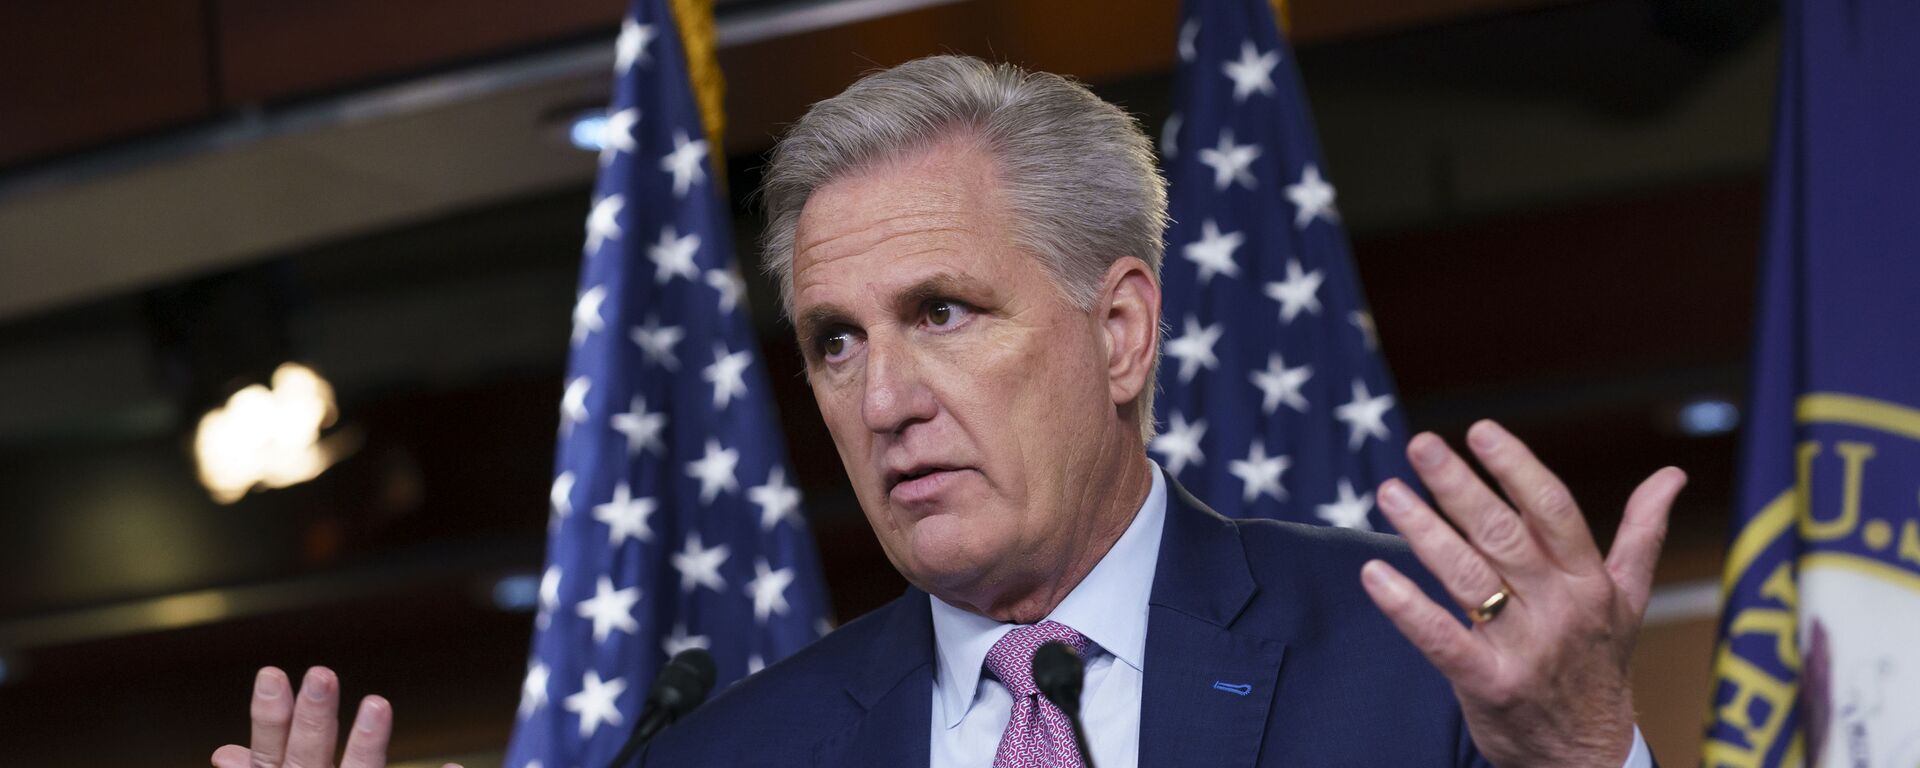 House Minority Leader Kevin McCarthy, R-Calif., takes questions at a news conference prior to meeting with police officers injured in the Jan. 6 attack on Congress, at the Capitol in Washington, Friday, June 25, 2021. - Sputnik International, 1920, 22.08.2022